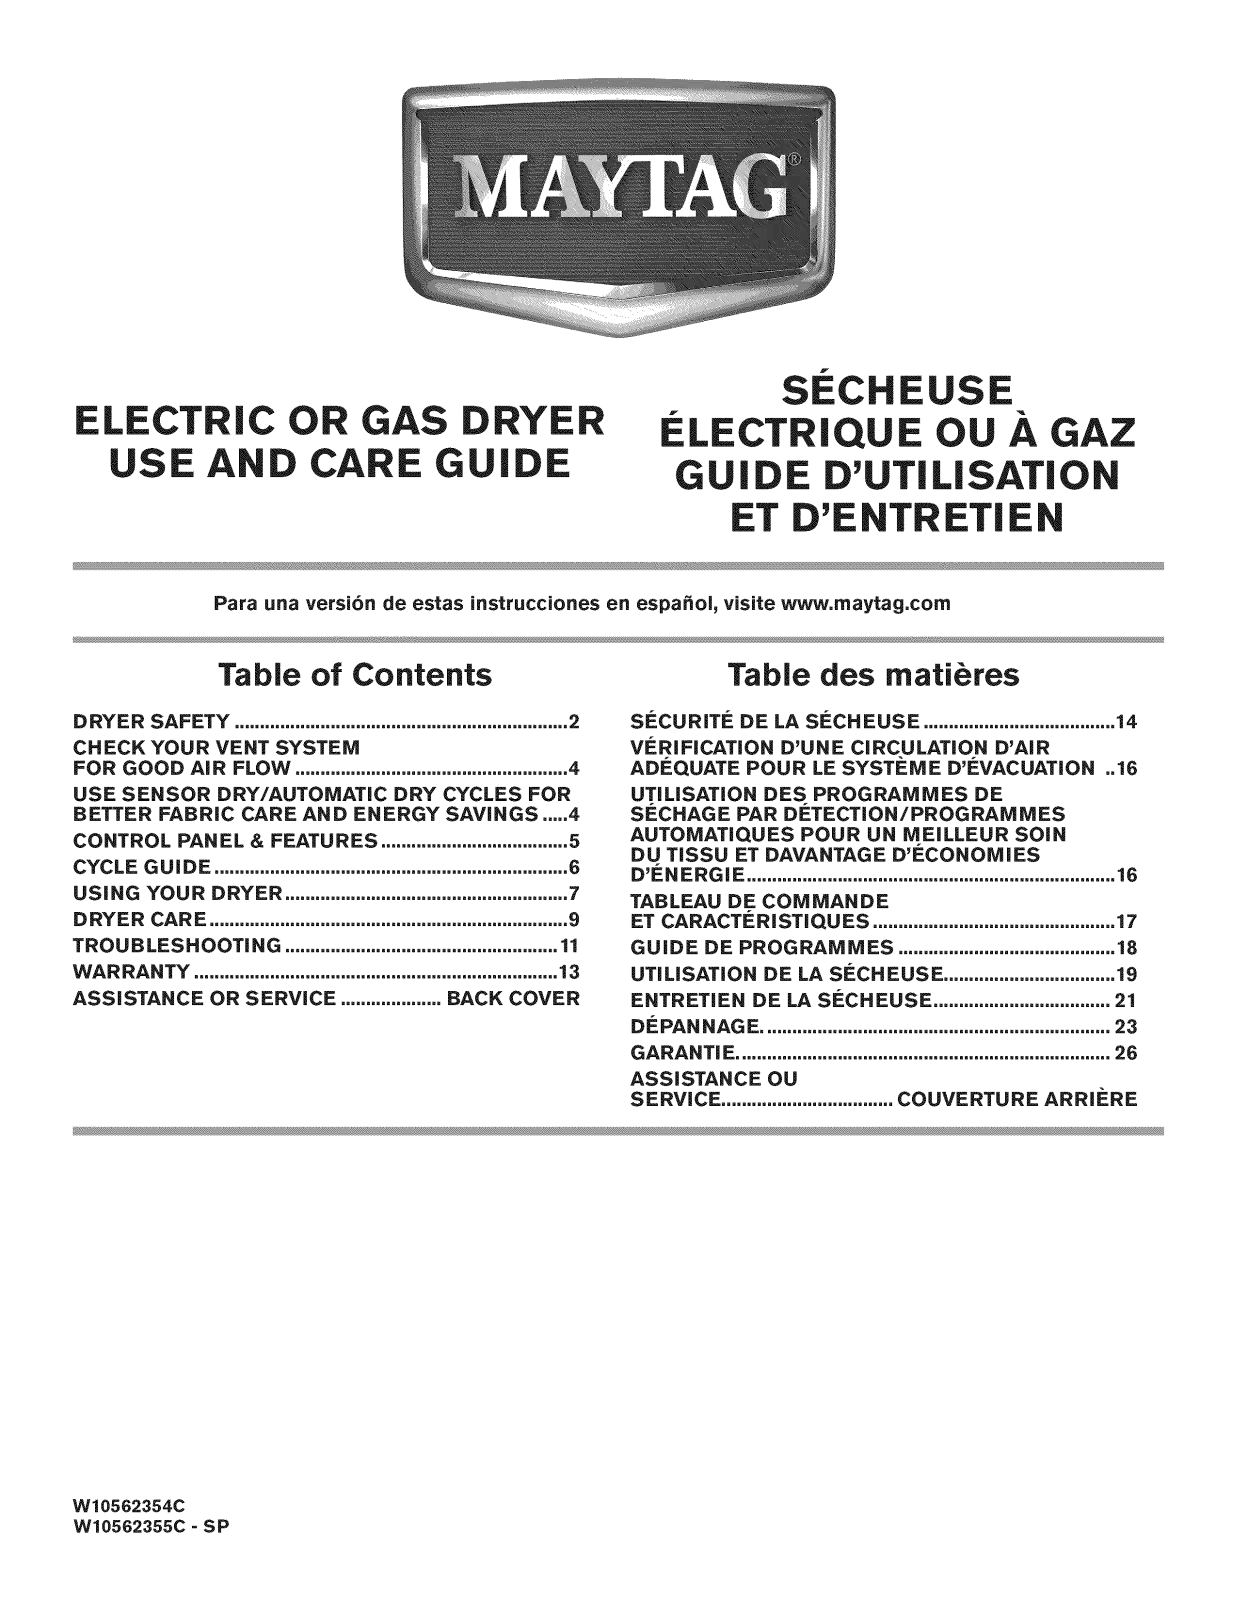 Maytag YMEDC555DW0, YMEDC555DW1, YMEDC415EW1, YMEDC415EW0, YMEDC400BW1 Owner’s Manual